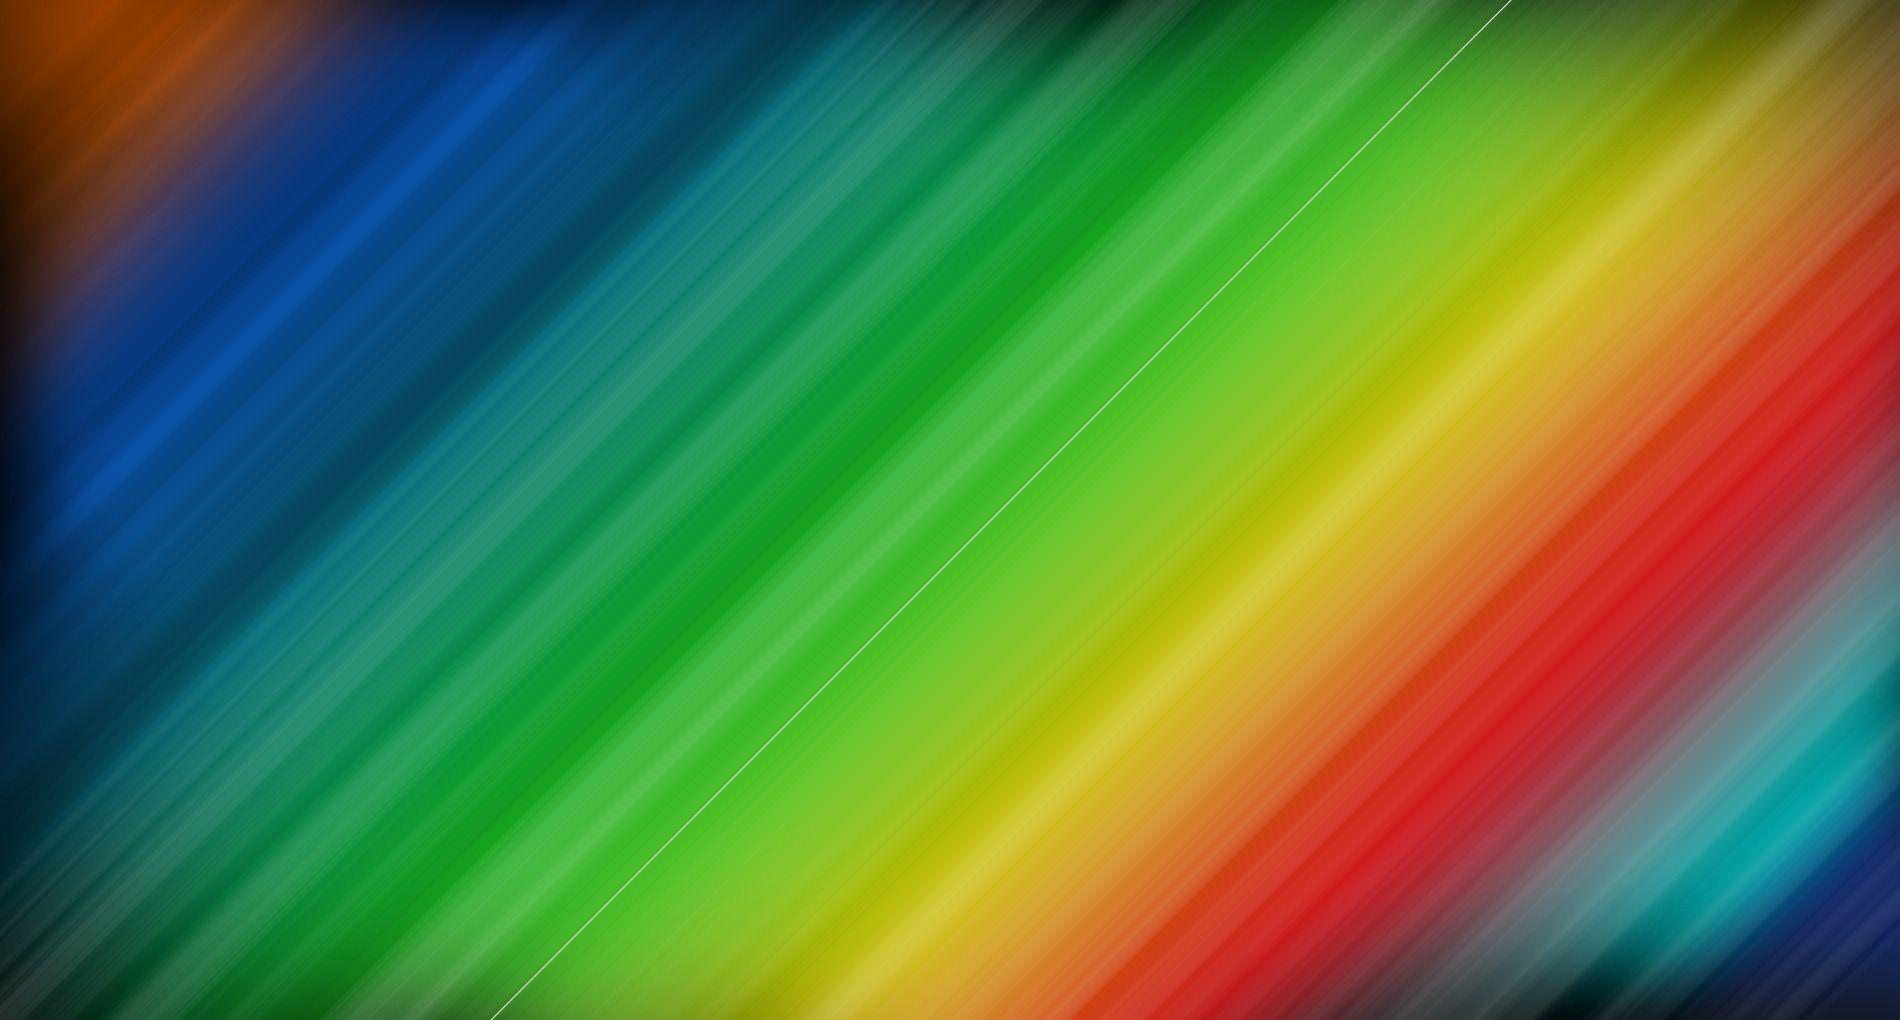 Wallpaper.wiki Colorful Plain Picture PIC WPE001765